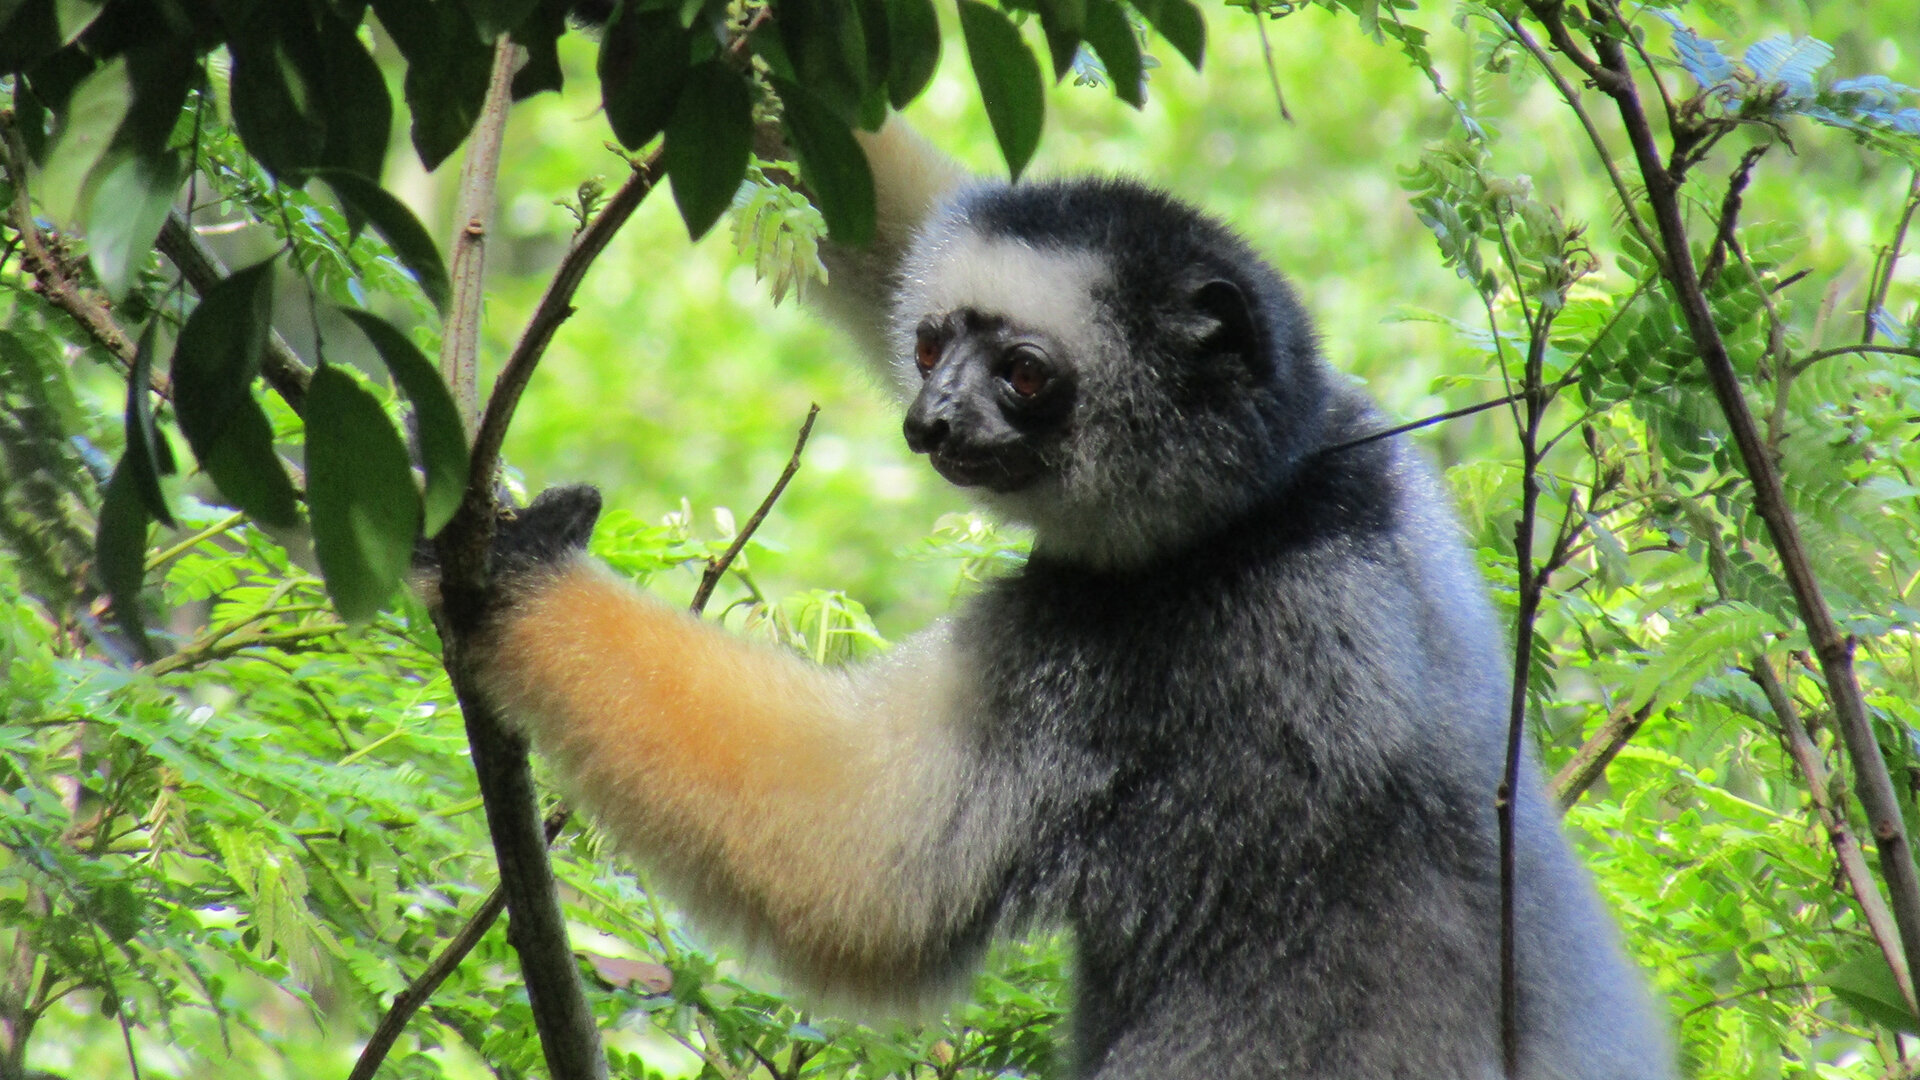 photo of Lemur's lament: When one vulnerable species stalks another image